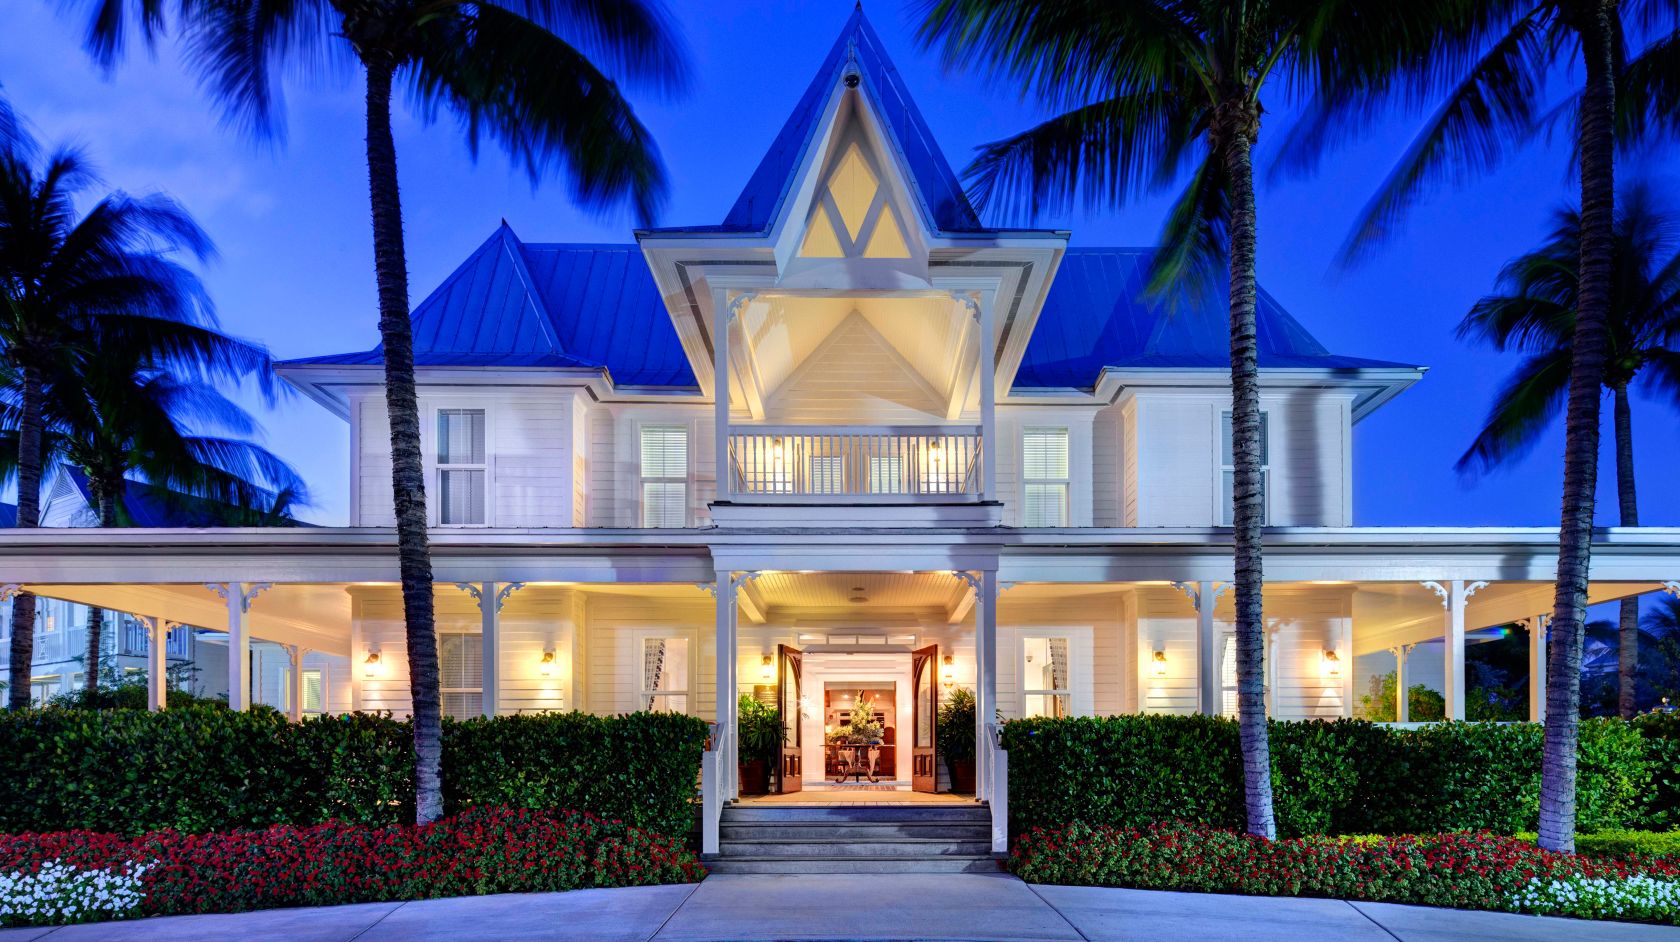 Explore Singh Resorts' Luxury Key West Hotels - Tranquility Bay at Night